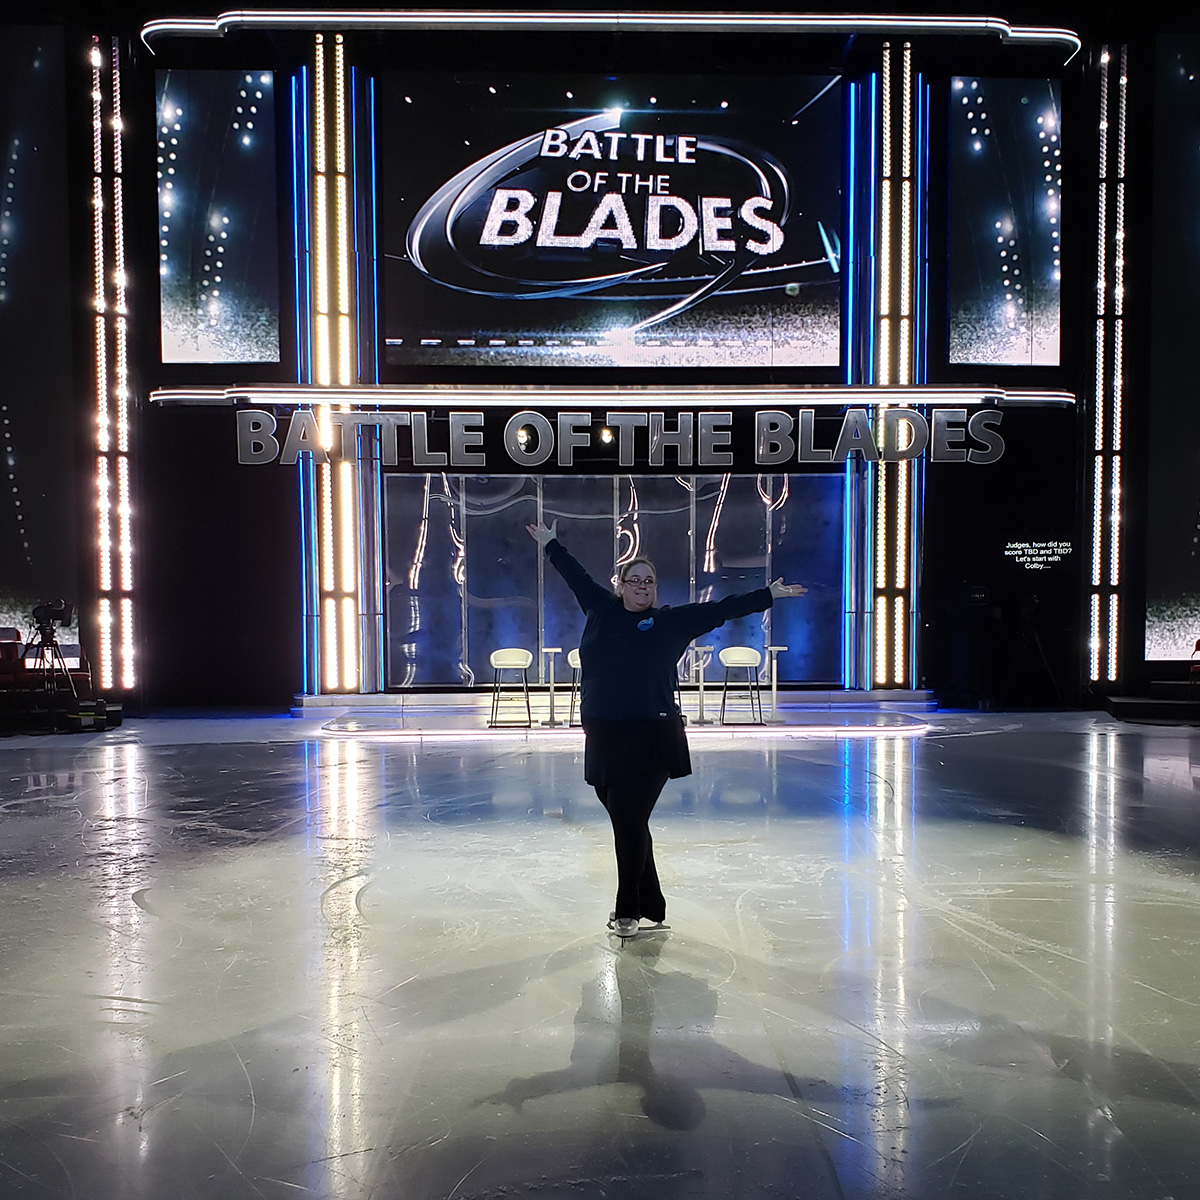 A large middle aged figure skater in front of the Battle of the Blades backdrop.